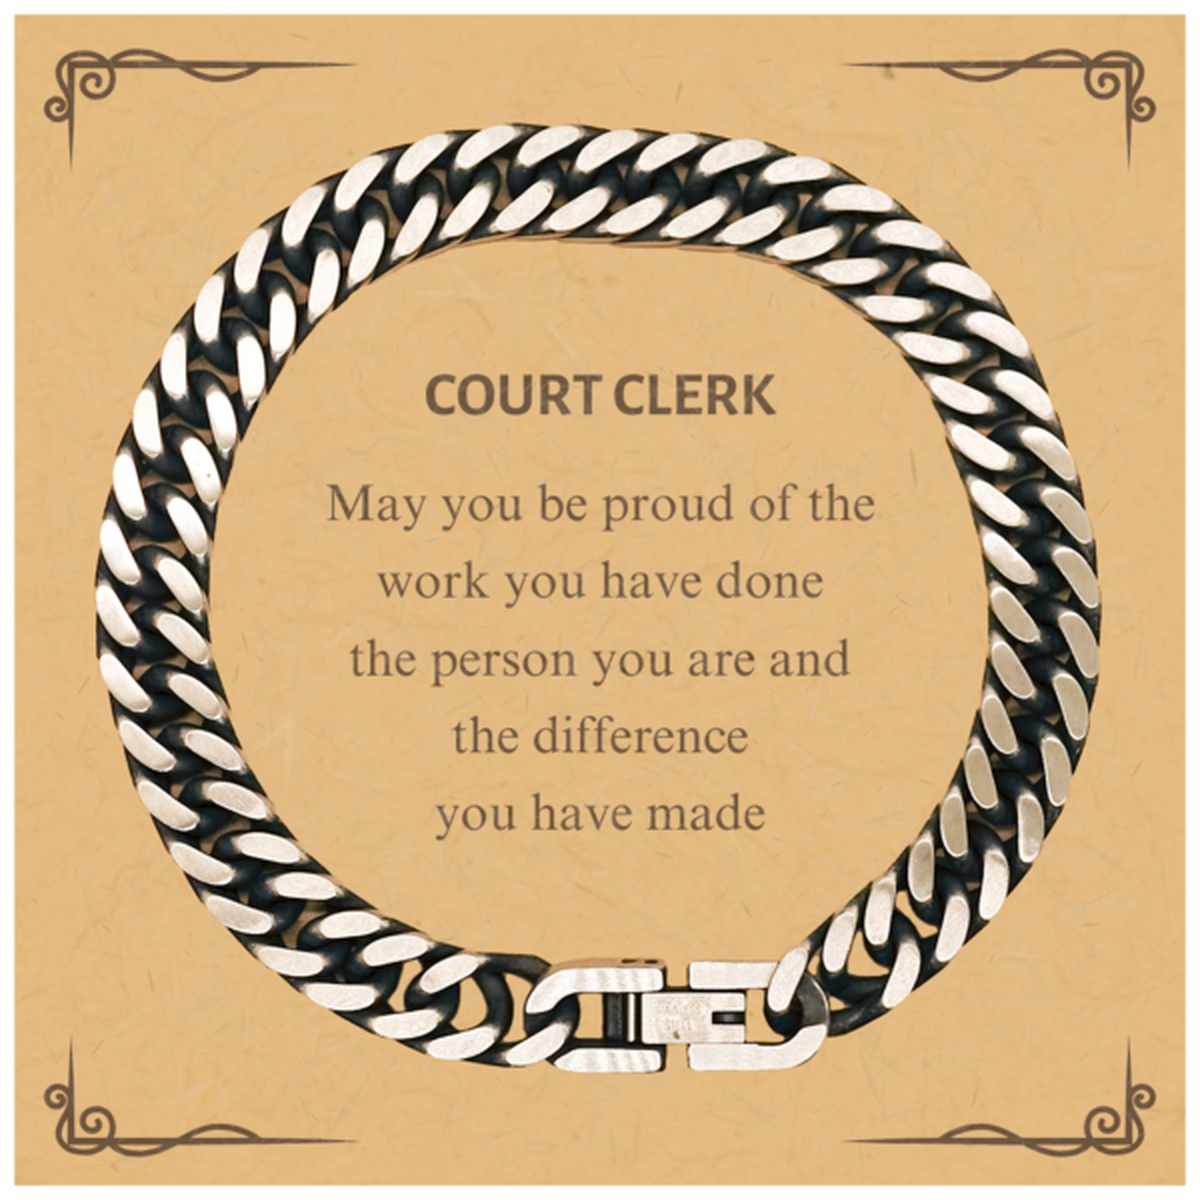 Court Clerk May you be proud of the work you have done, Retirement Court Clerk Cuban Link Chain Bracelet for Colleague Appreciation Gifts Amazing for Court Clerk